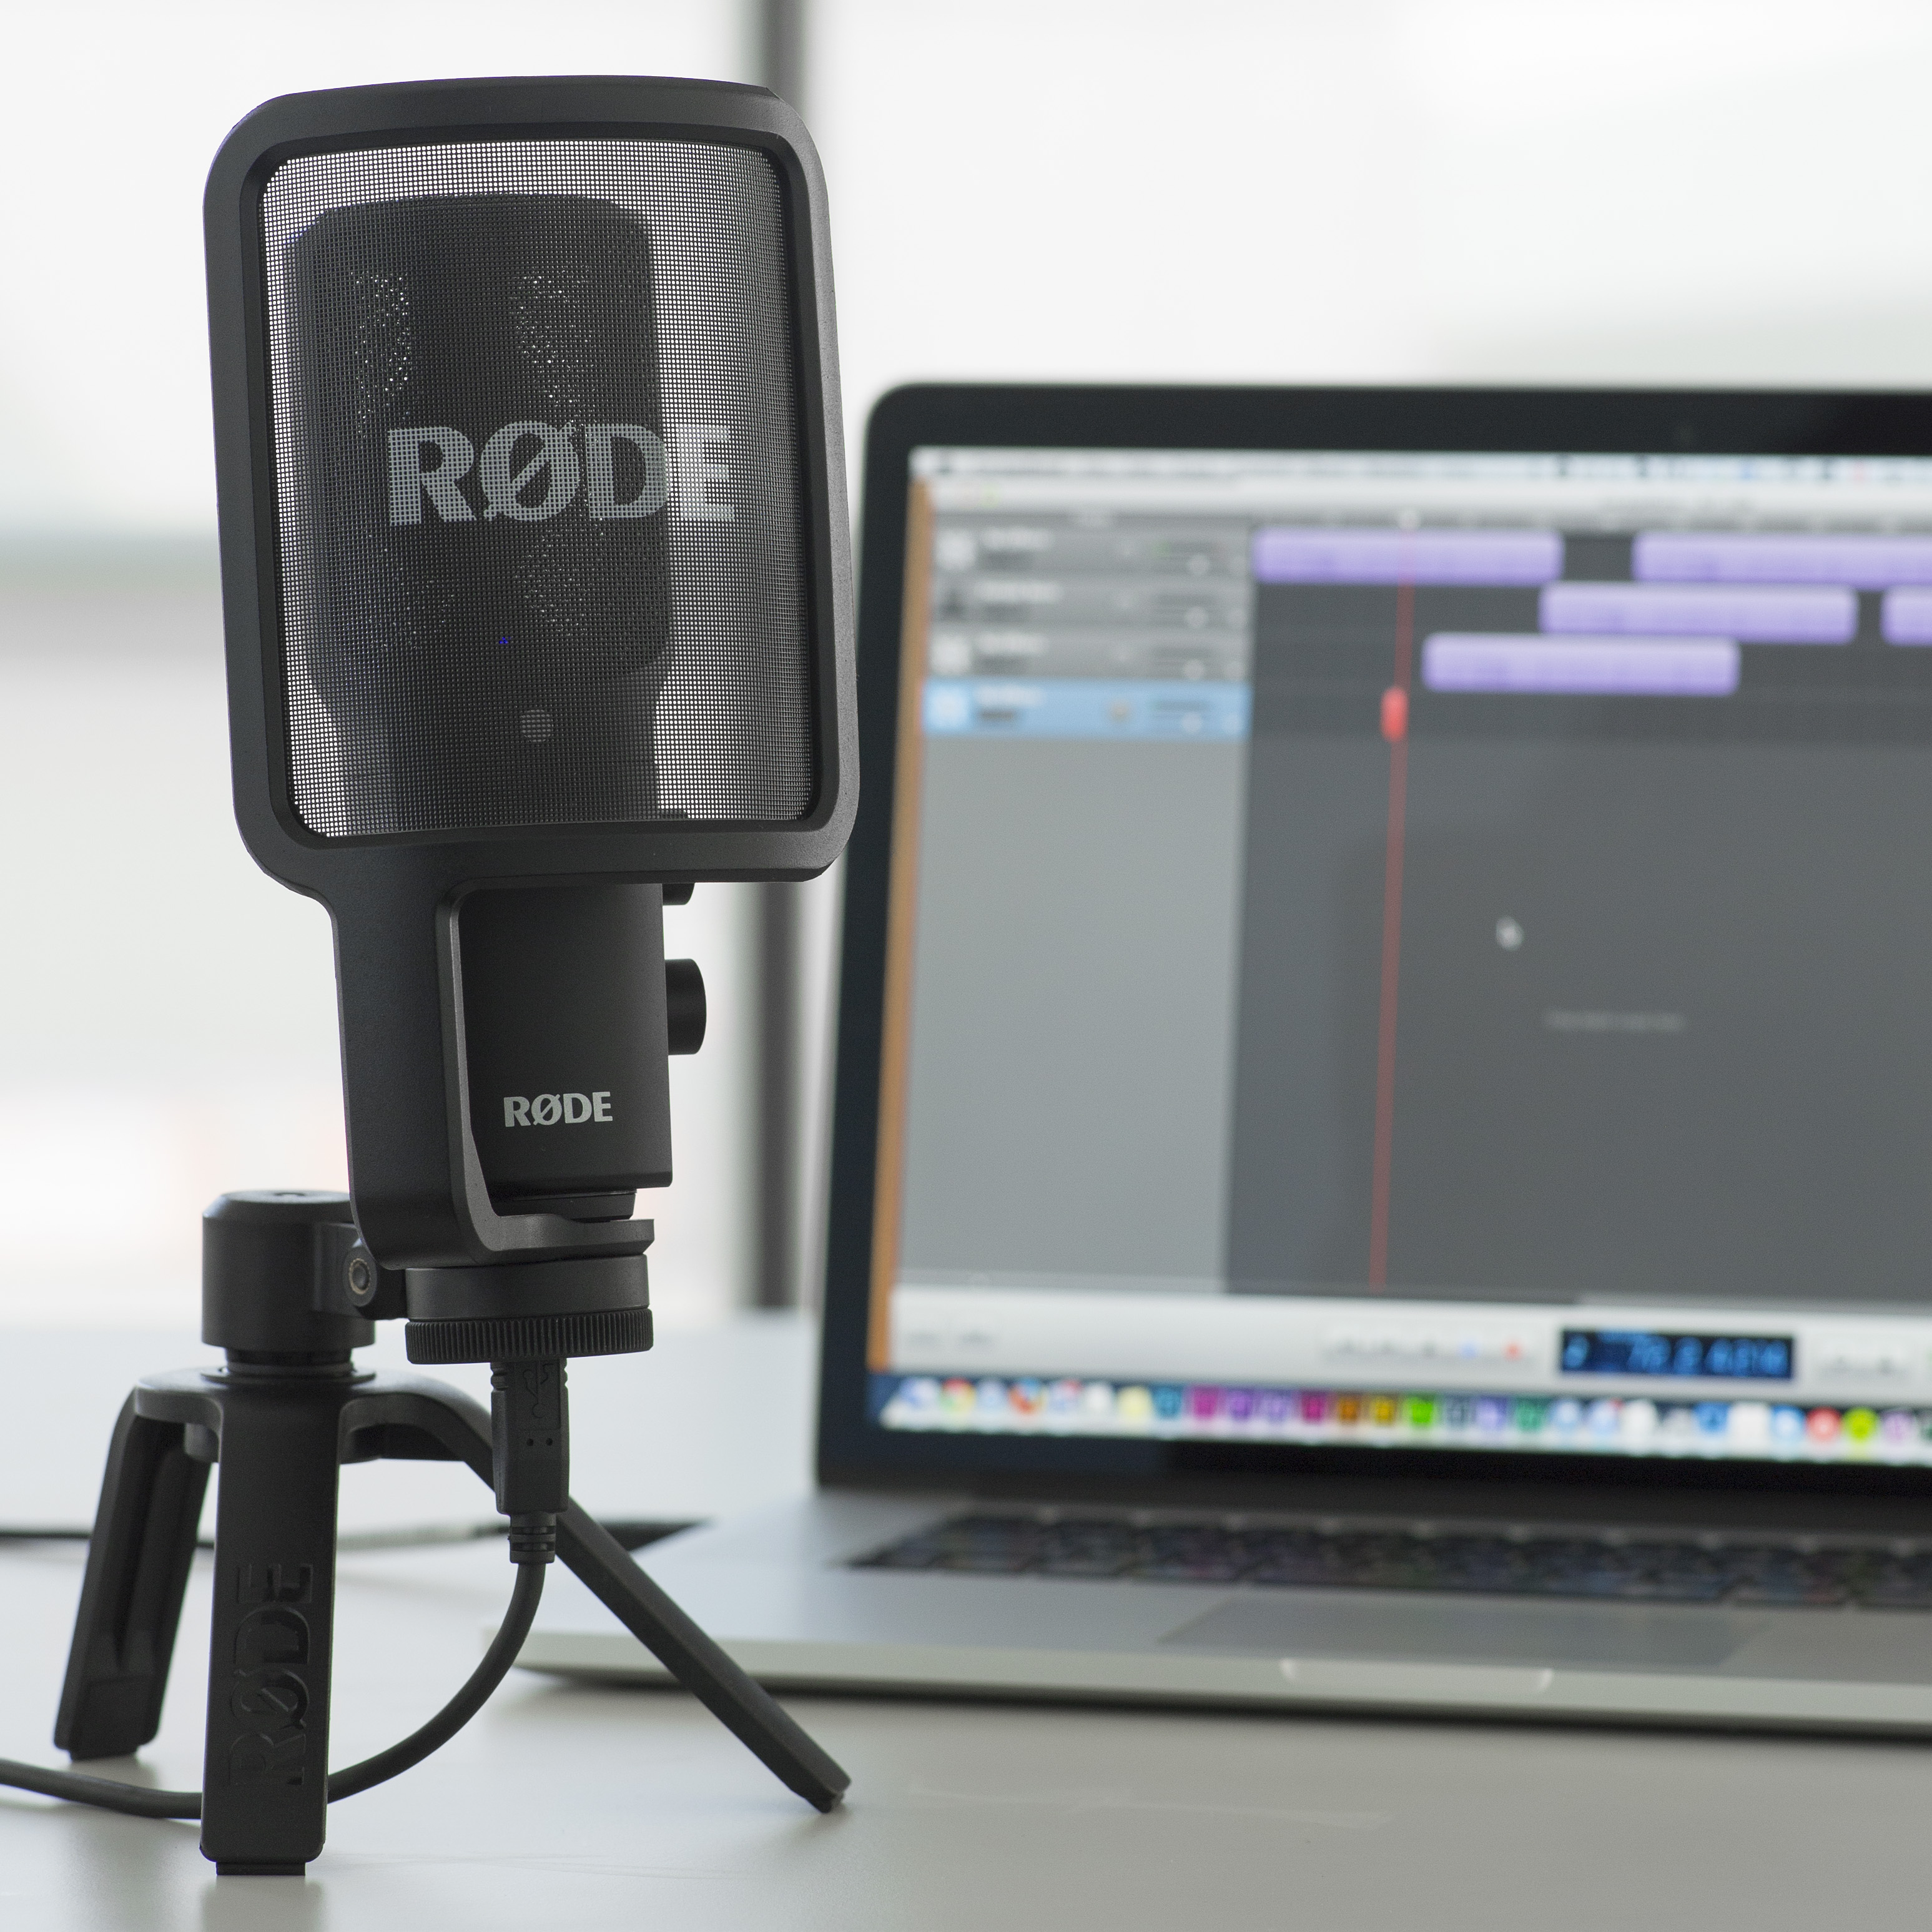 Enjoy Studio-quality recording on the go with the new RØDE NT-USB 10